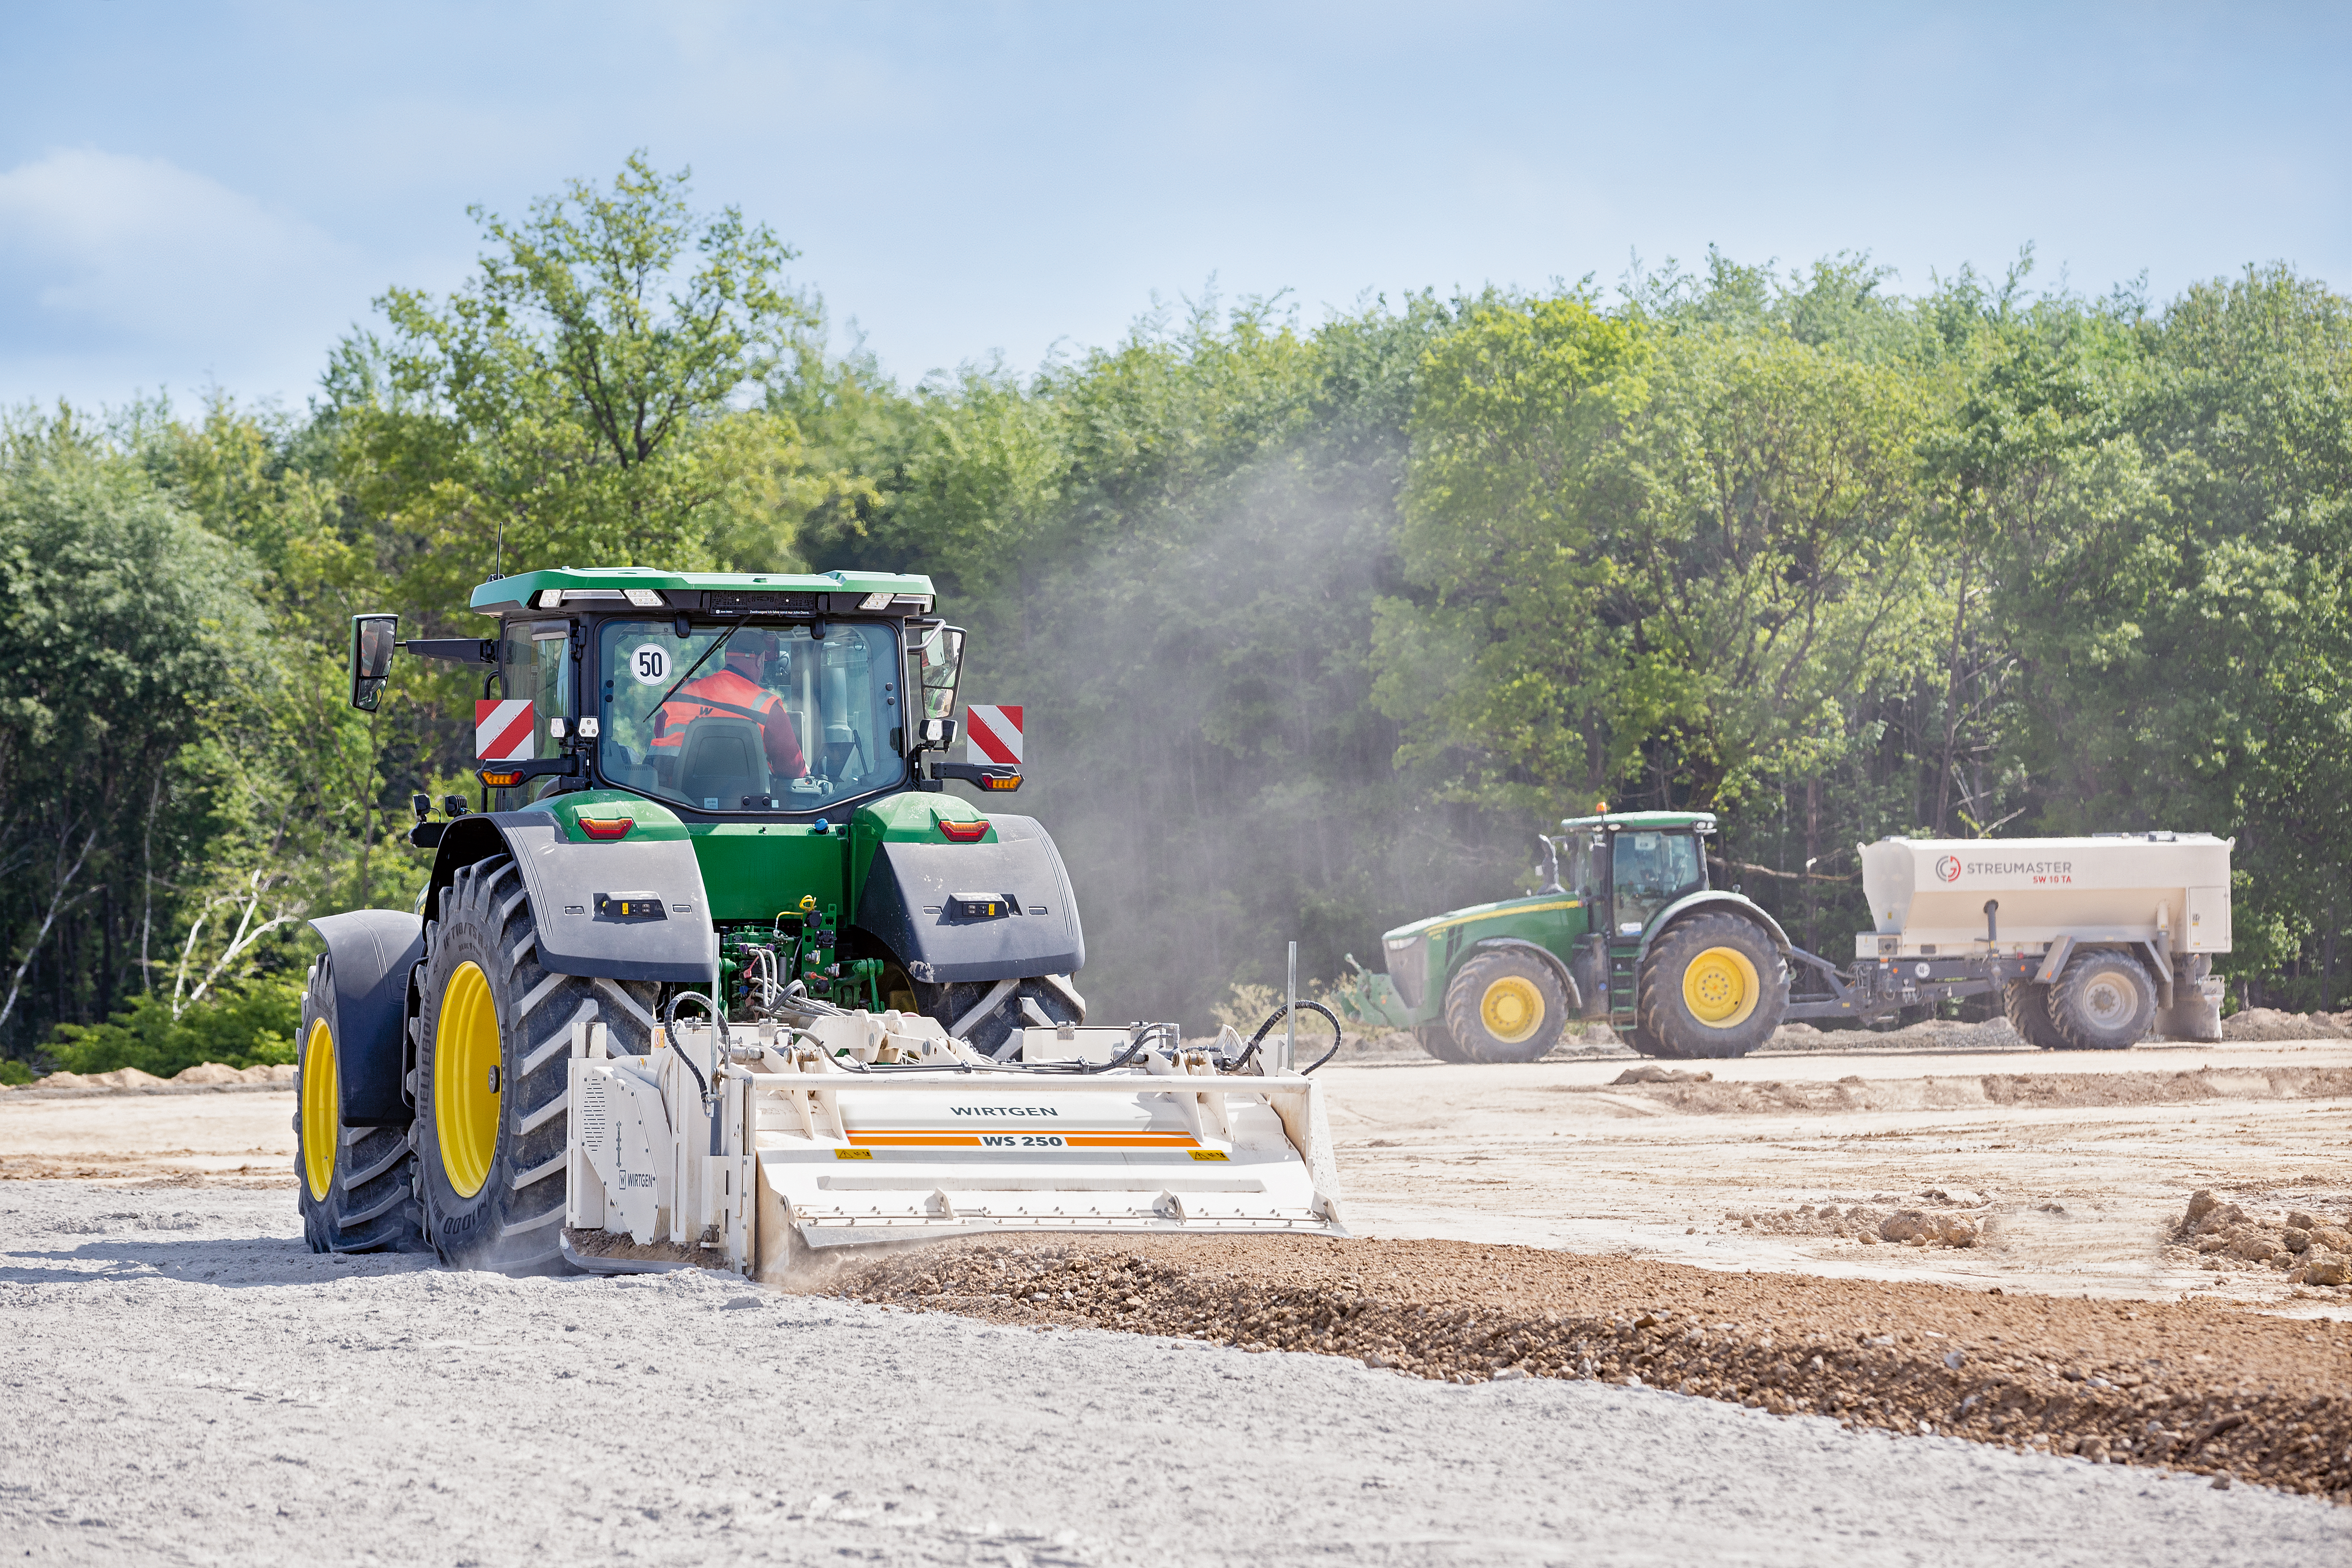 With Wirtgen’s tractor-towed stabilizers like the WS 250, a tractor can be quickly converted into a soil stabilizer, enabling it to be used productively outside the harvesting season as well.